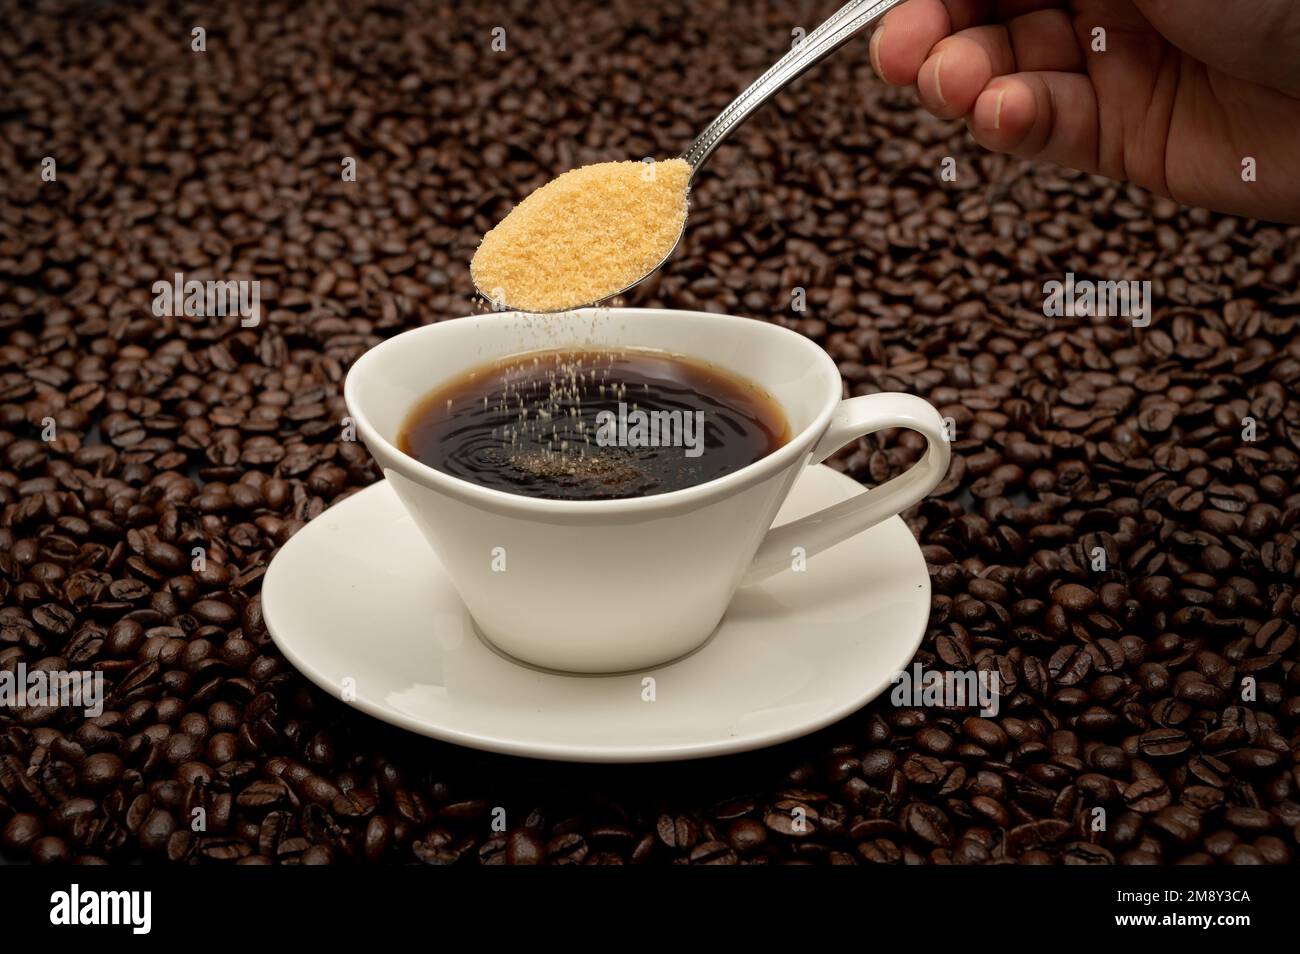 Cup of coffee on brown coffee beans Stock Photo